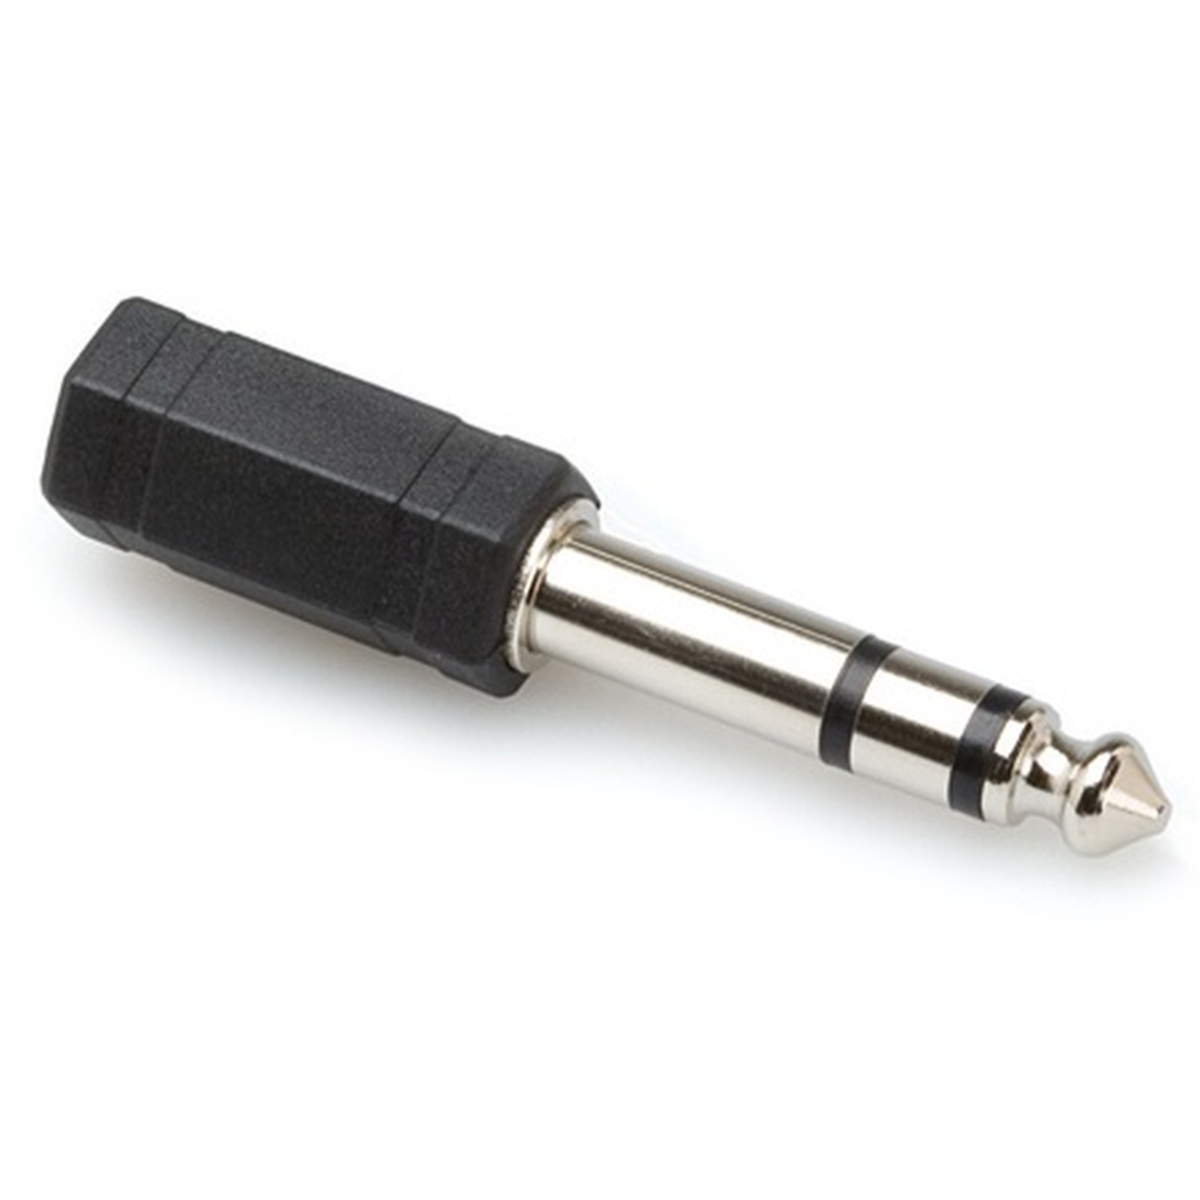 GPM-103 Adapter - 3.5 mm TRS to 1/4 in TRS